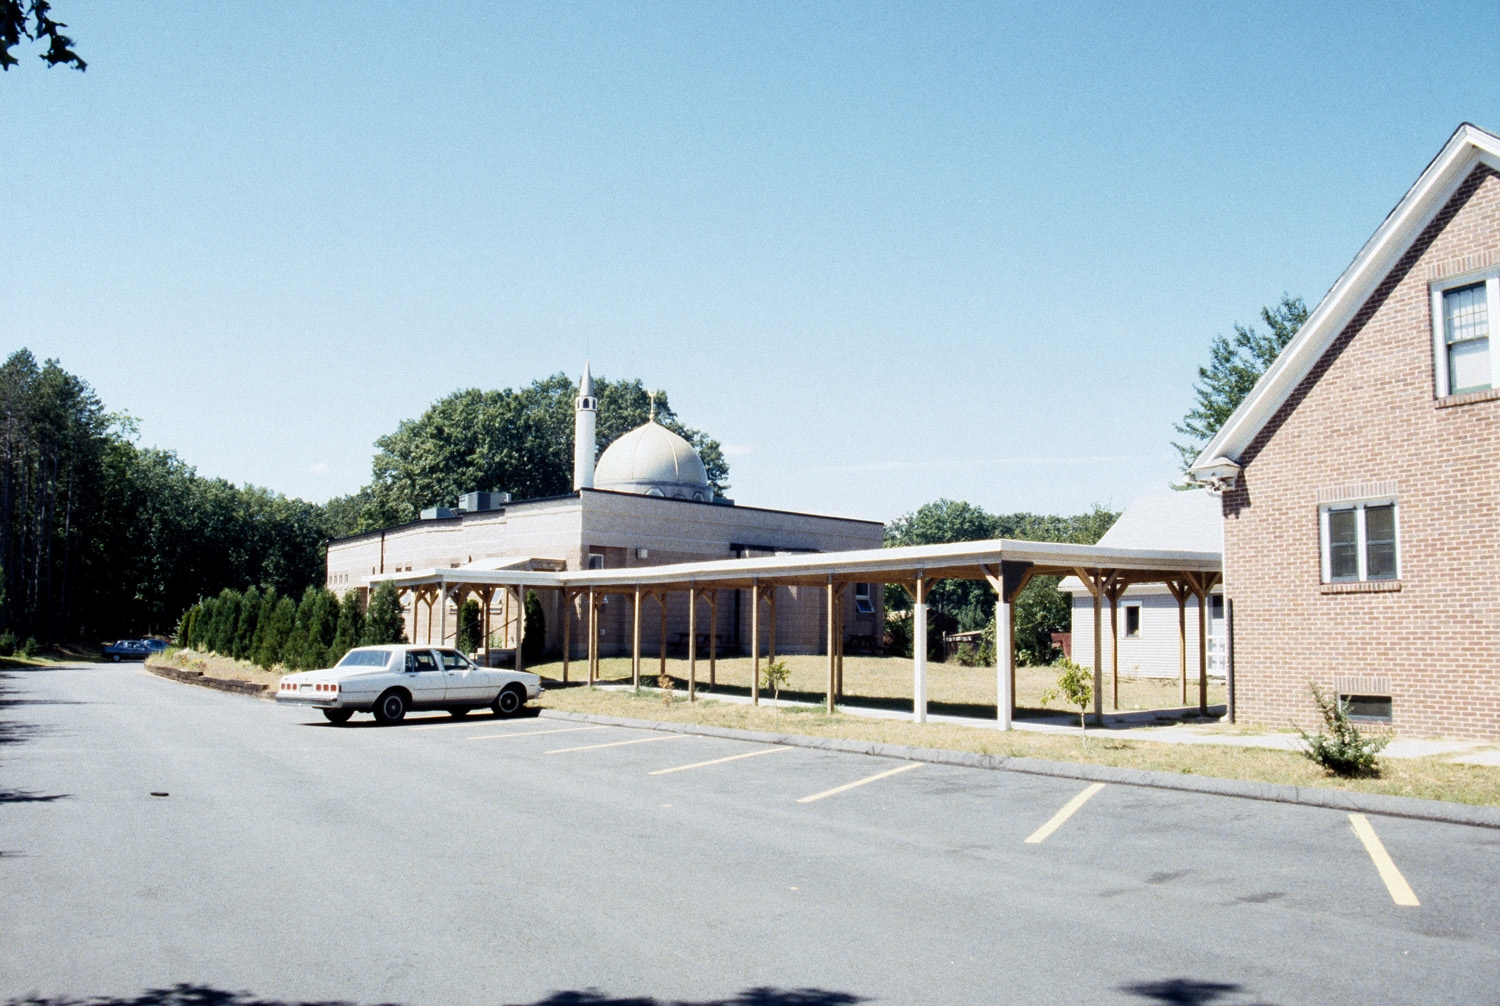 Islamic Society of Western Massachusetts - View from parking lot, looking west; the covered walkway and houses are no longer extant